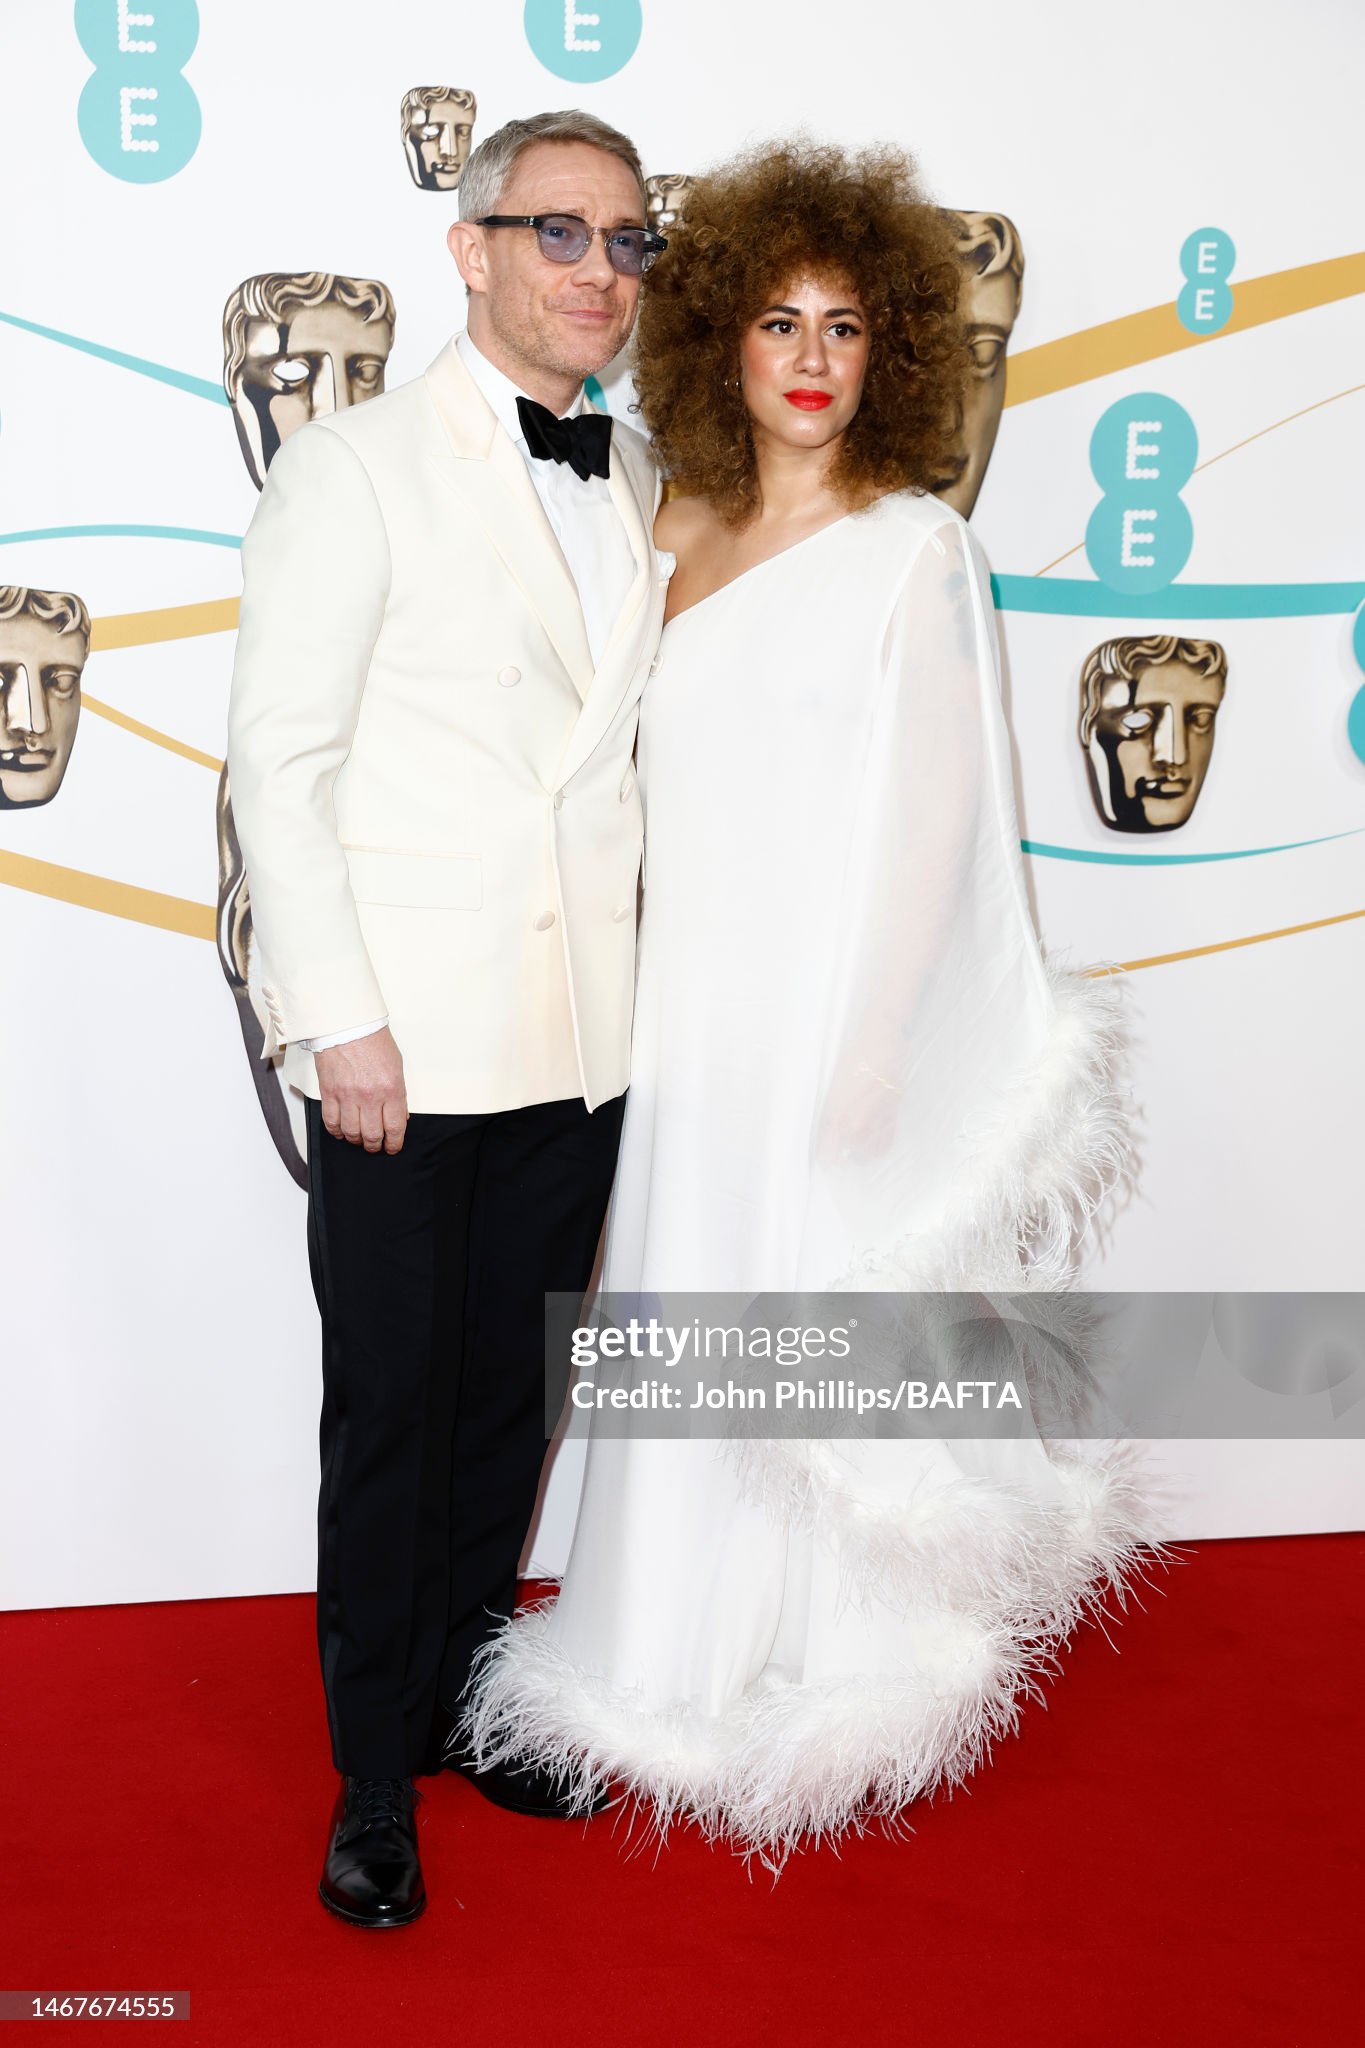 martin-freeman-and-nia-the-light-attend-the-ee-bafta-film-awards-2023-at-the-royal-festival.jpg